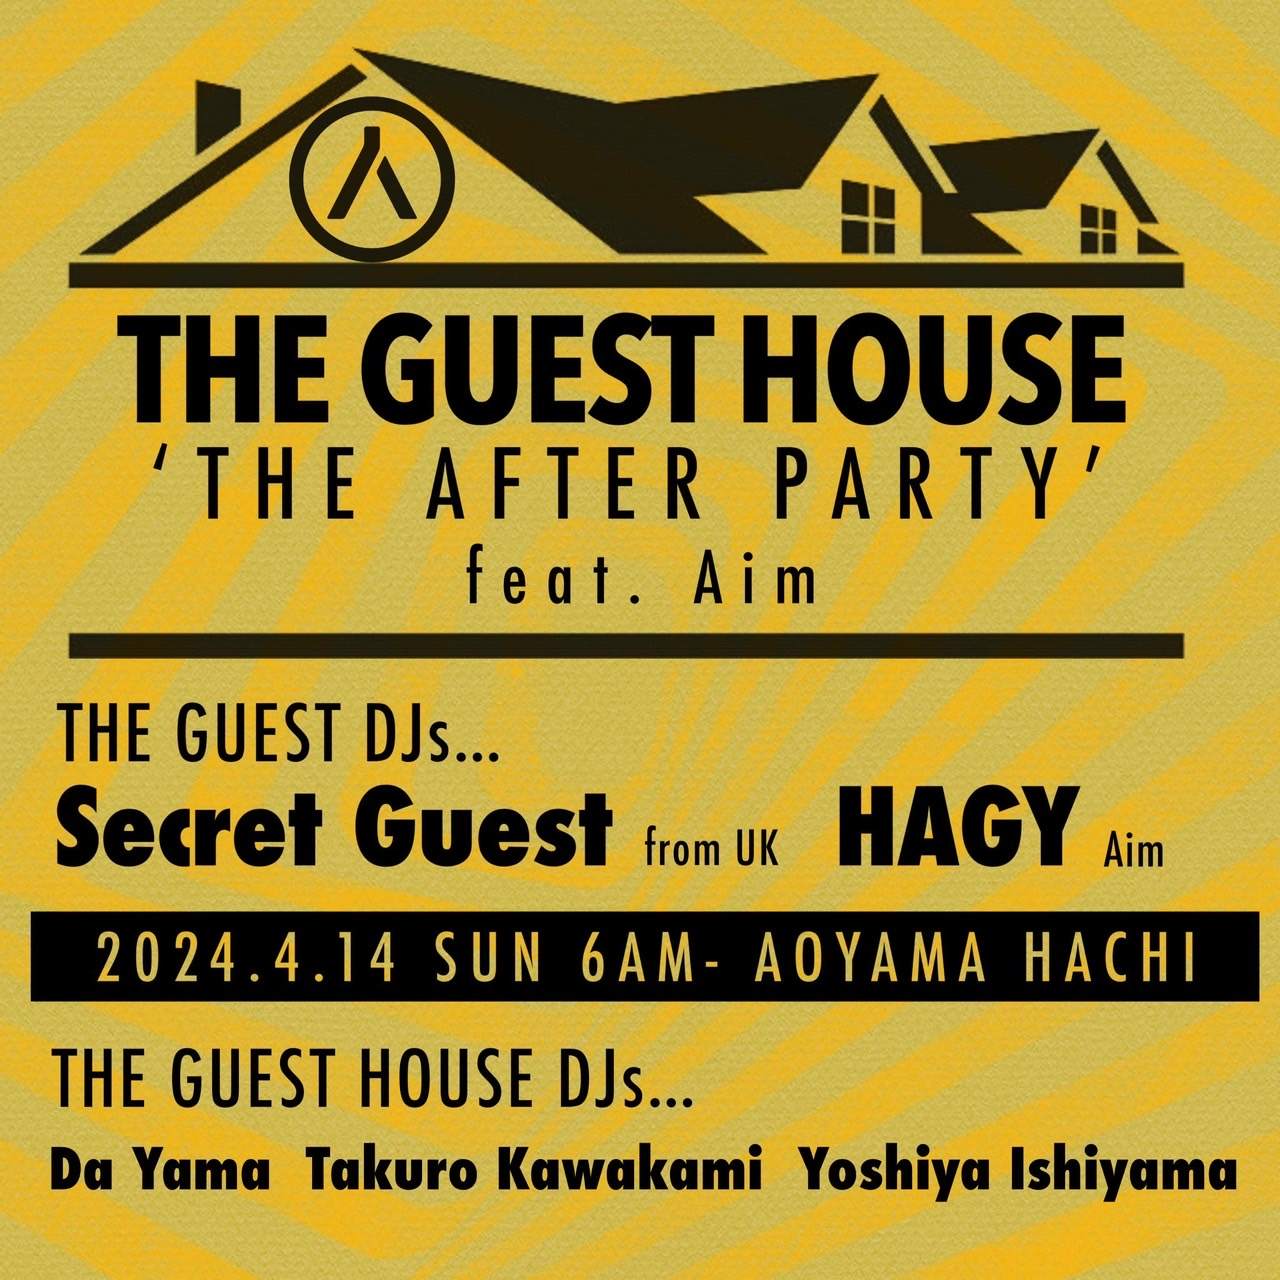 THE GUEST HOUSE presents 'THE AFTER PARTY' - Página frontal